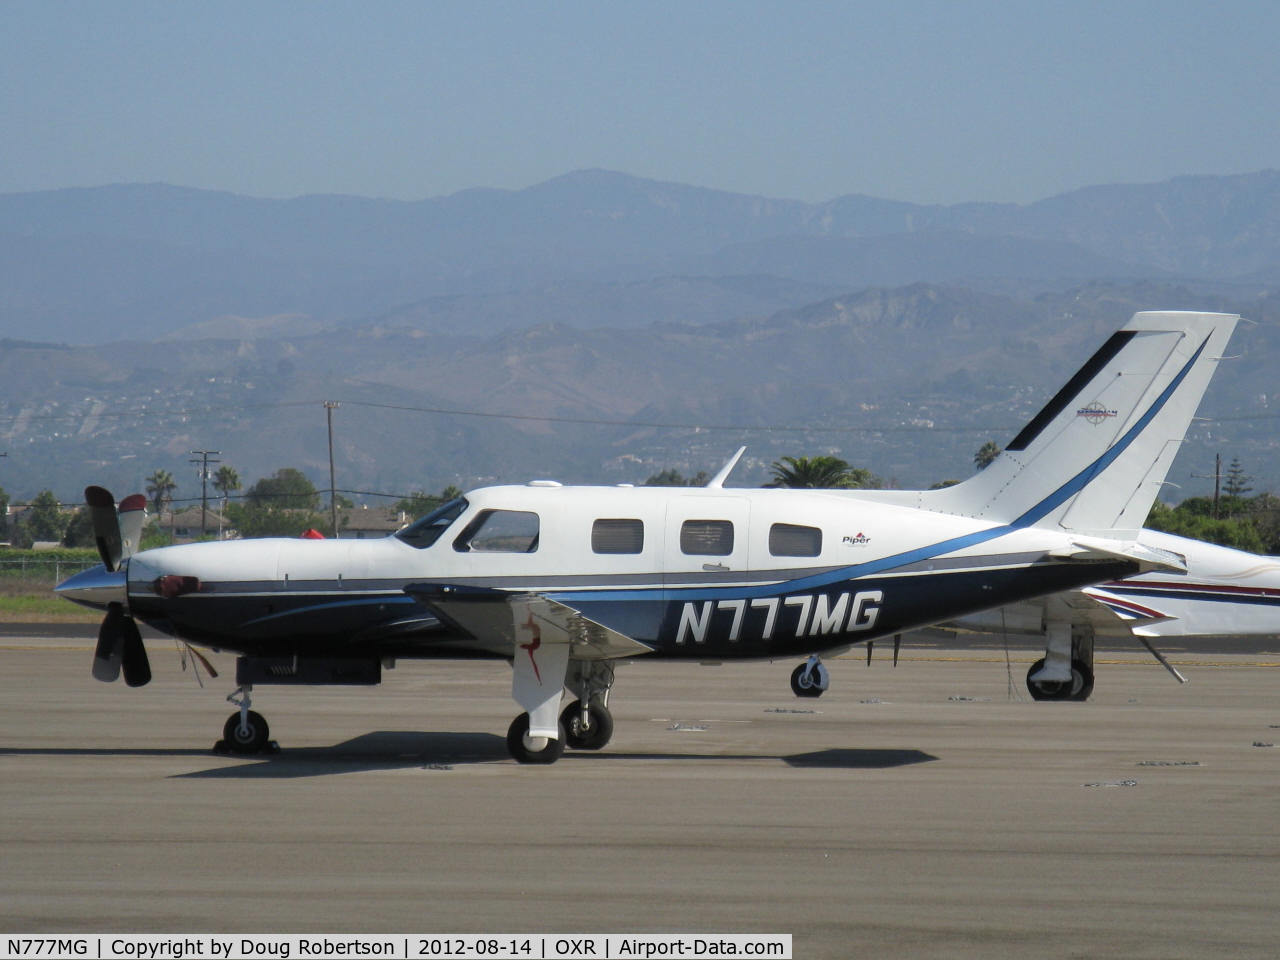 N777MG, Piper PA-46-500TP C/N 4697066, 2003 Piper PA-46-500TP MALIBU MERIDIAN, one P&W(C)PT6A-42A turboprop flat rated at 500 shp continuous, Hartzell 4-blade CS rev. pitch prop, Pressurized. Max cruise at mid-weight 302 mph.